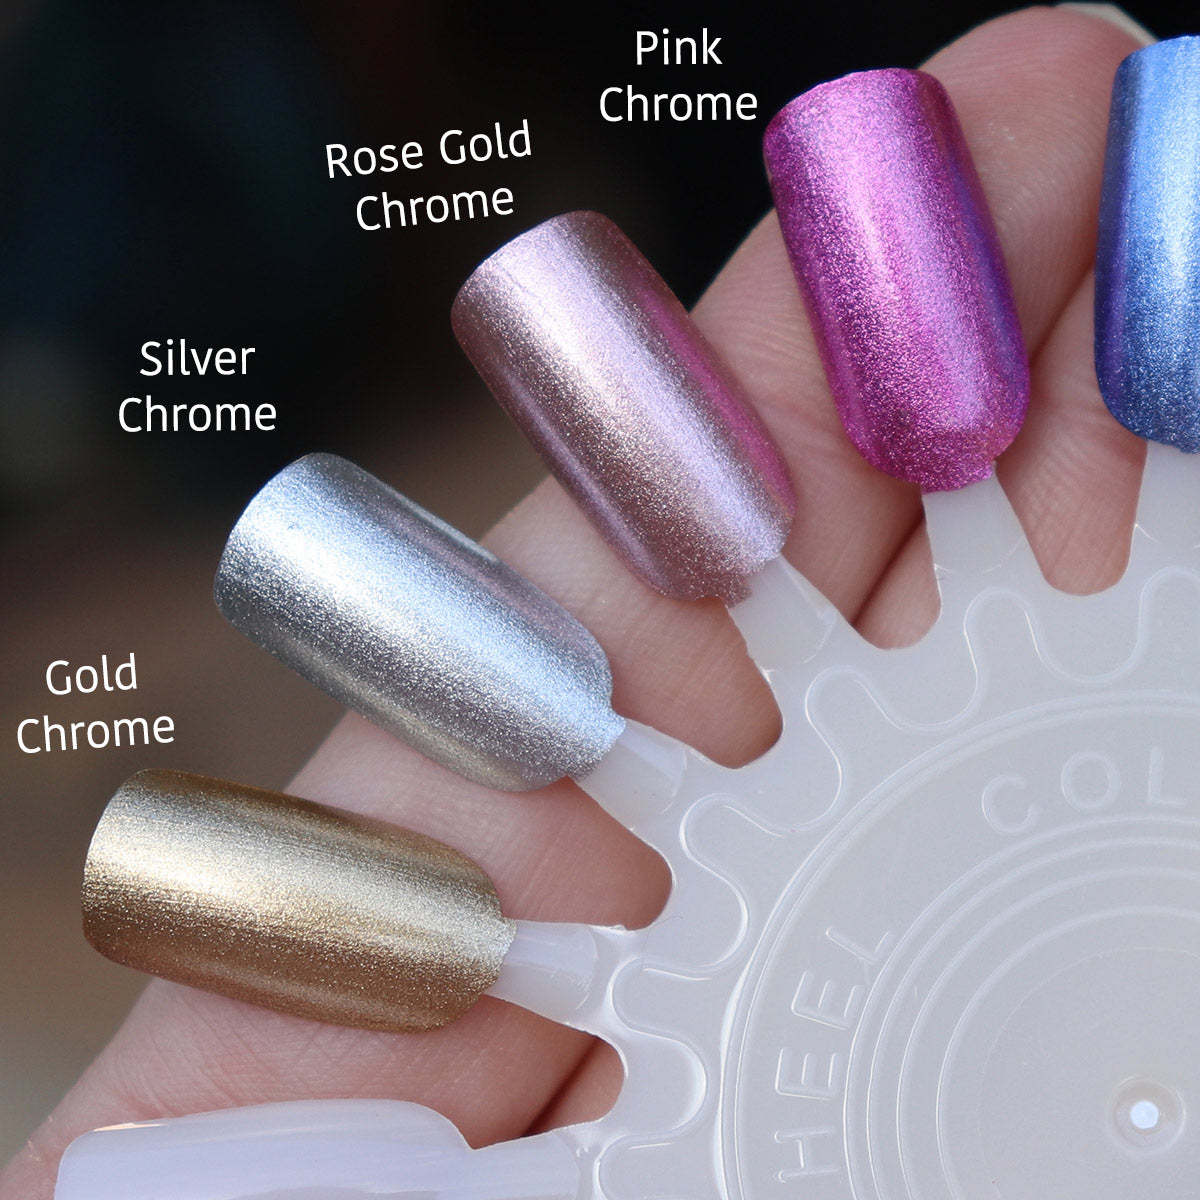 beetles Gel Polish Chrome Nail Powder Kit Black White Colors Gel Polish  Mirror Effect Holographic Aurora Iridescent Pearlescent Manicure Art  Decoration Glitter,Holo Nail Powder 8 Colors 1g or 0.5g/Jar : Amazon.in:  Beauty